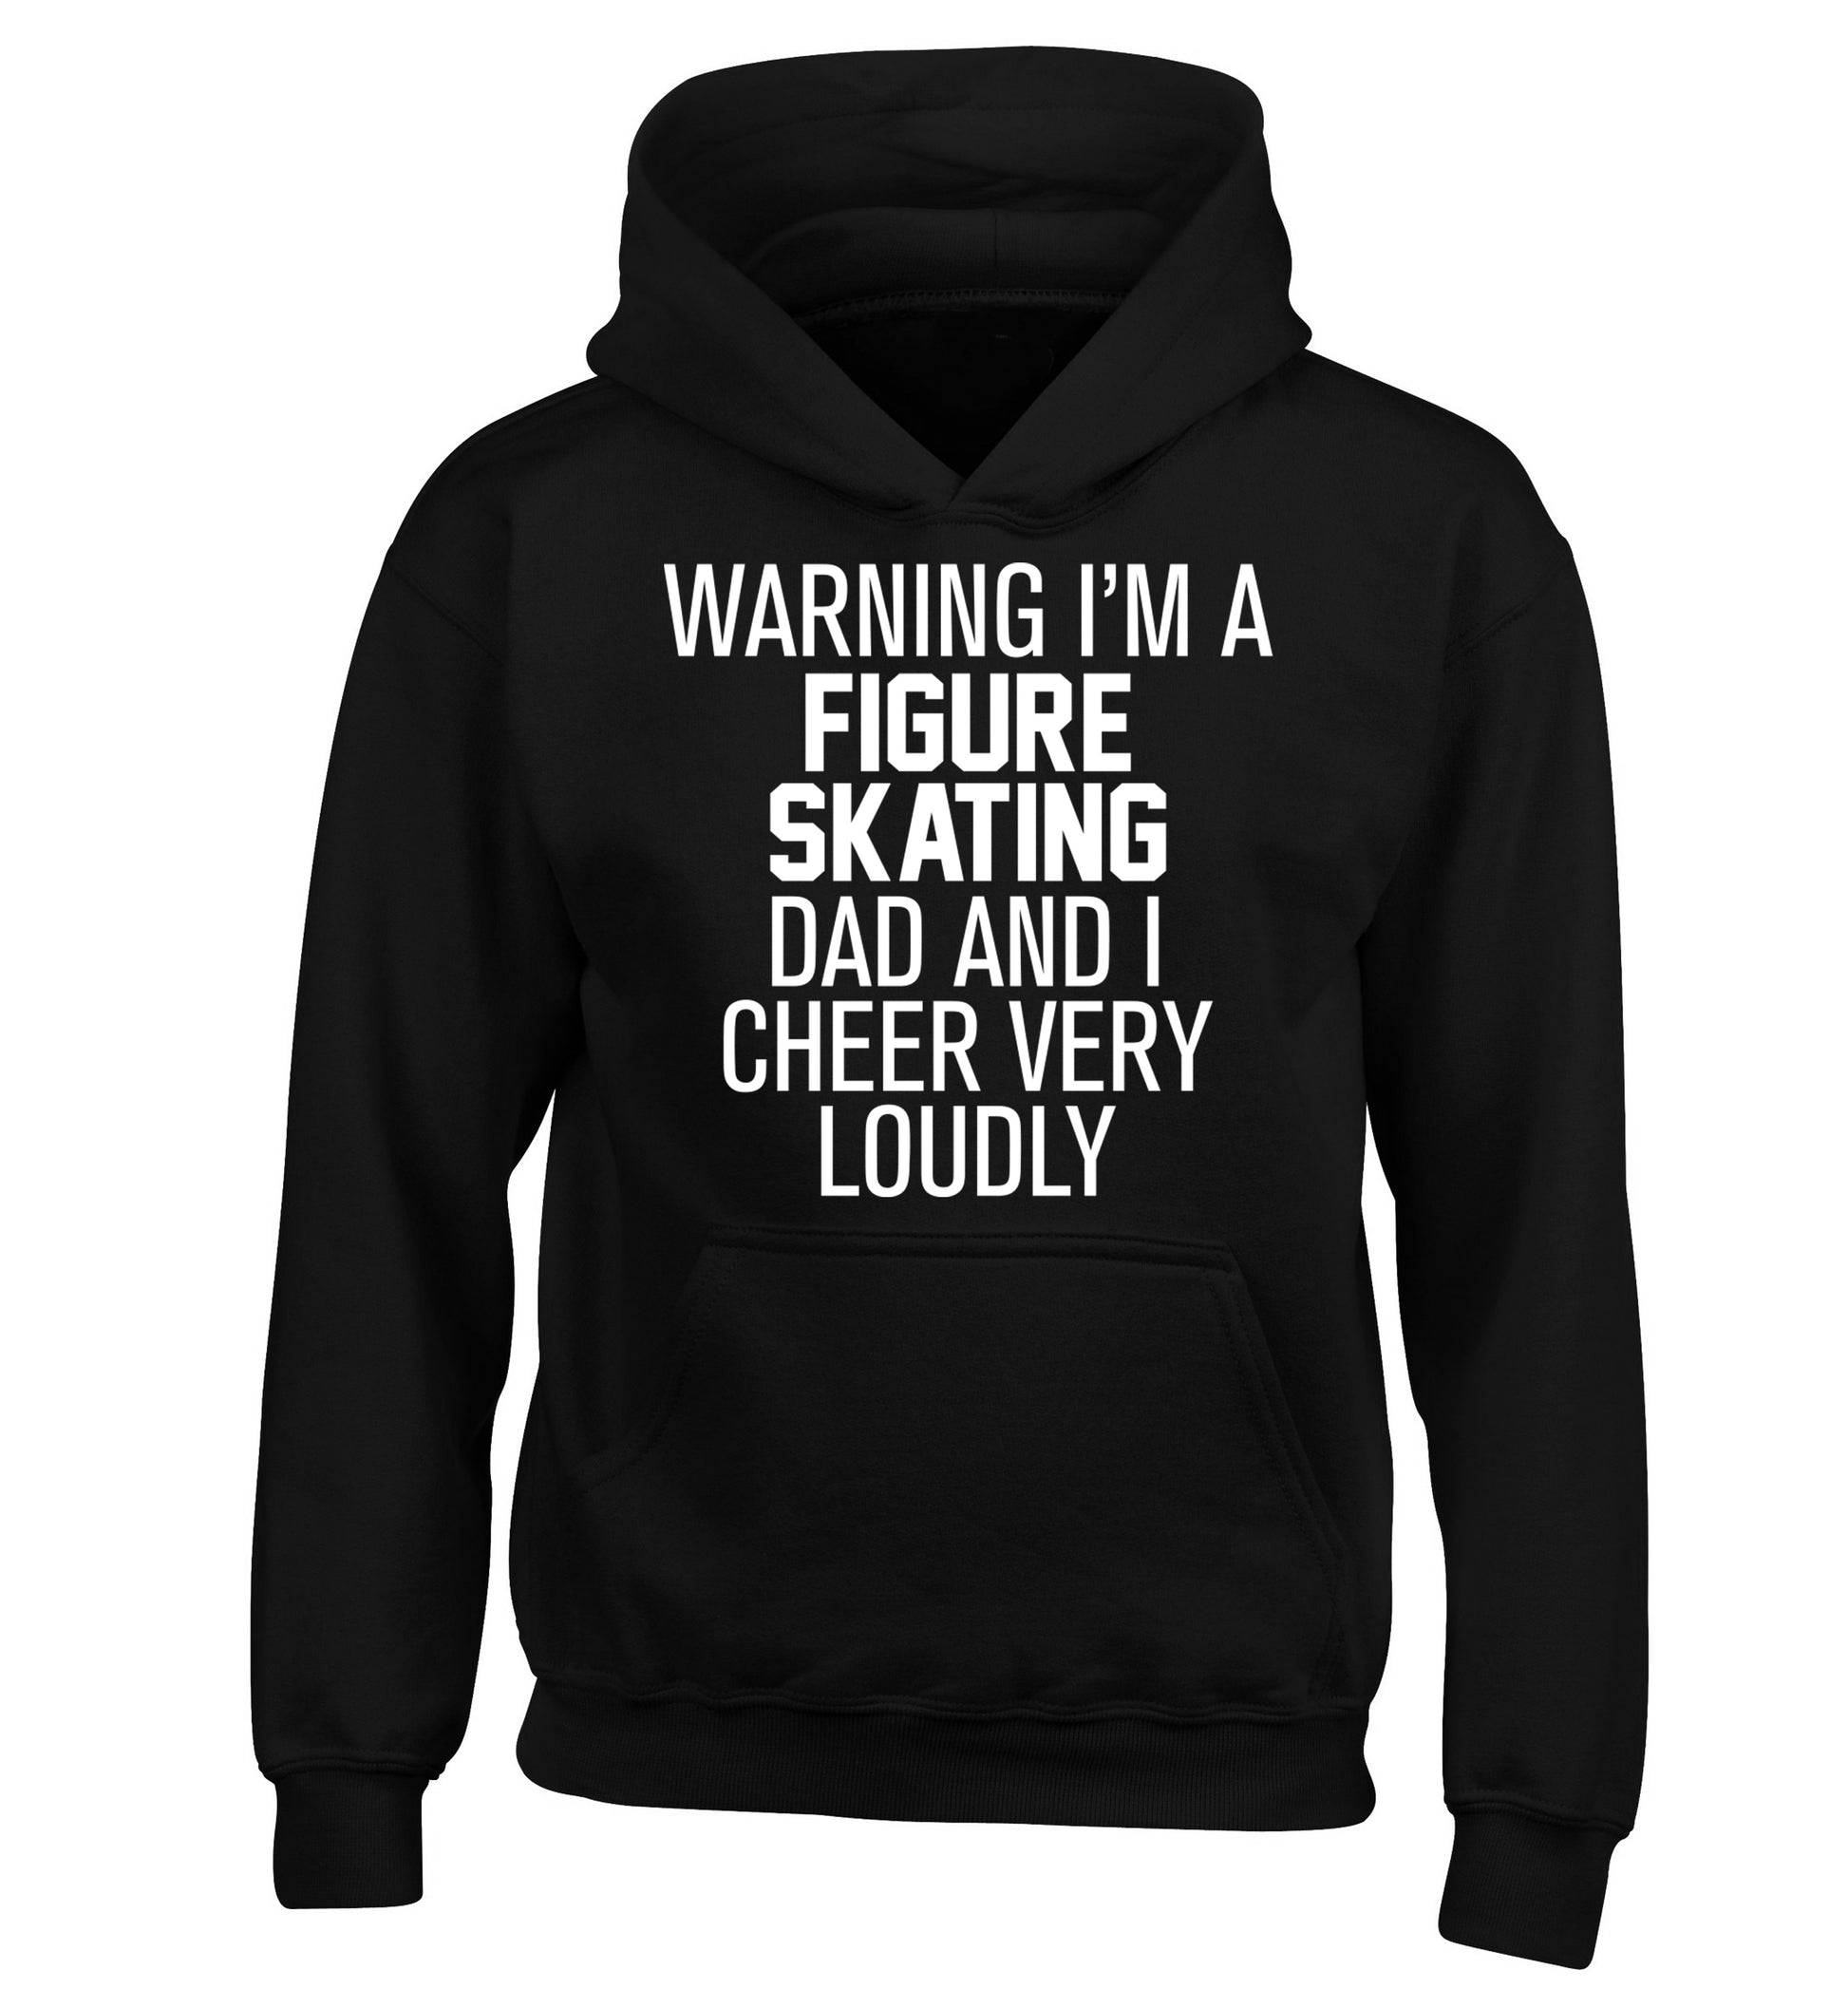 Warning I'm a figure skating dad and I cheer very loudly children's black hoodie 12-14 Years